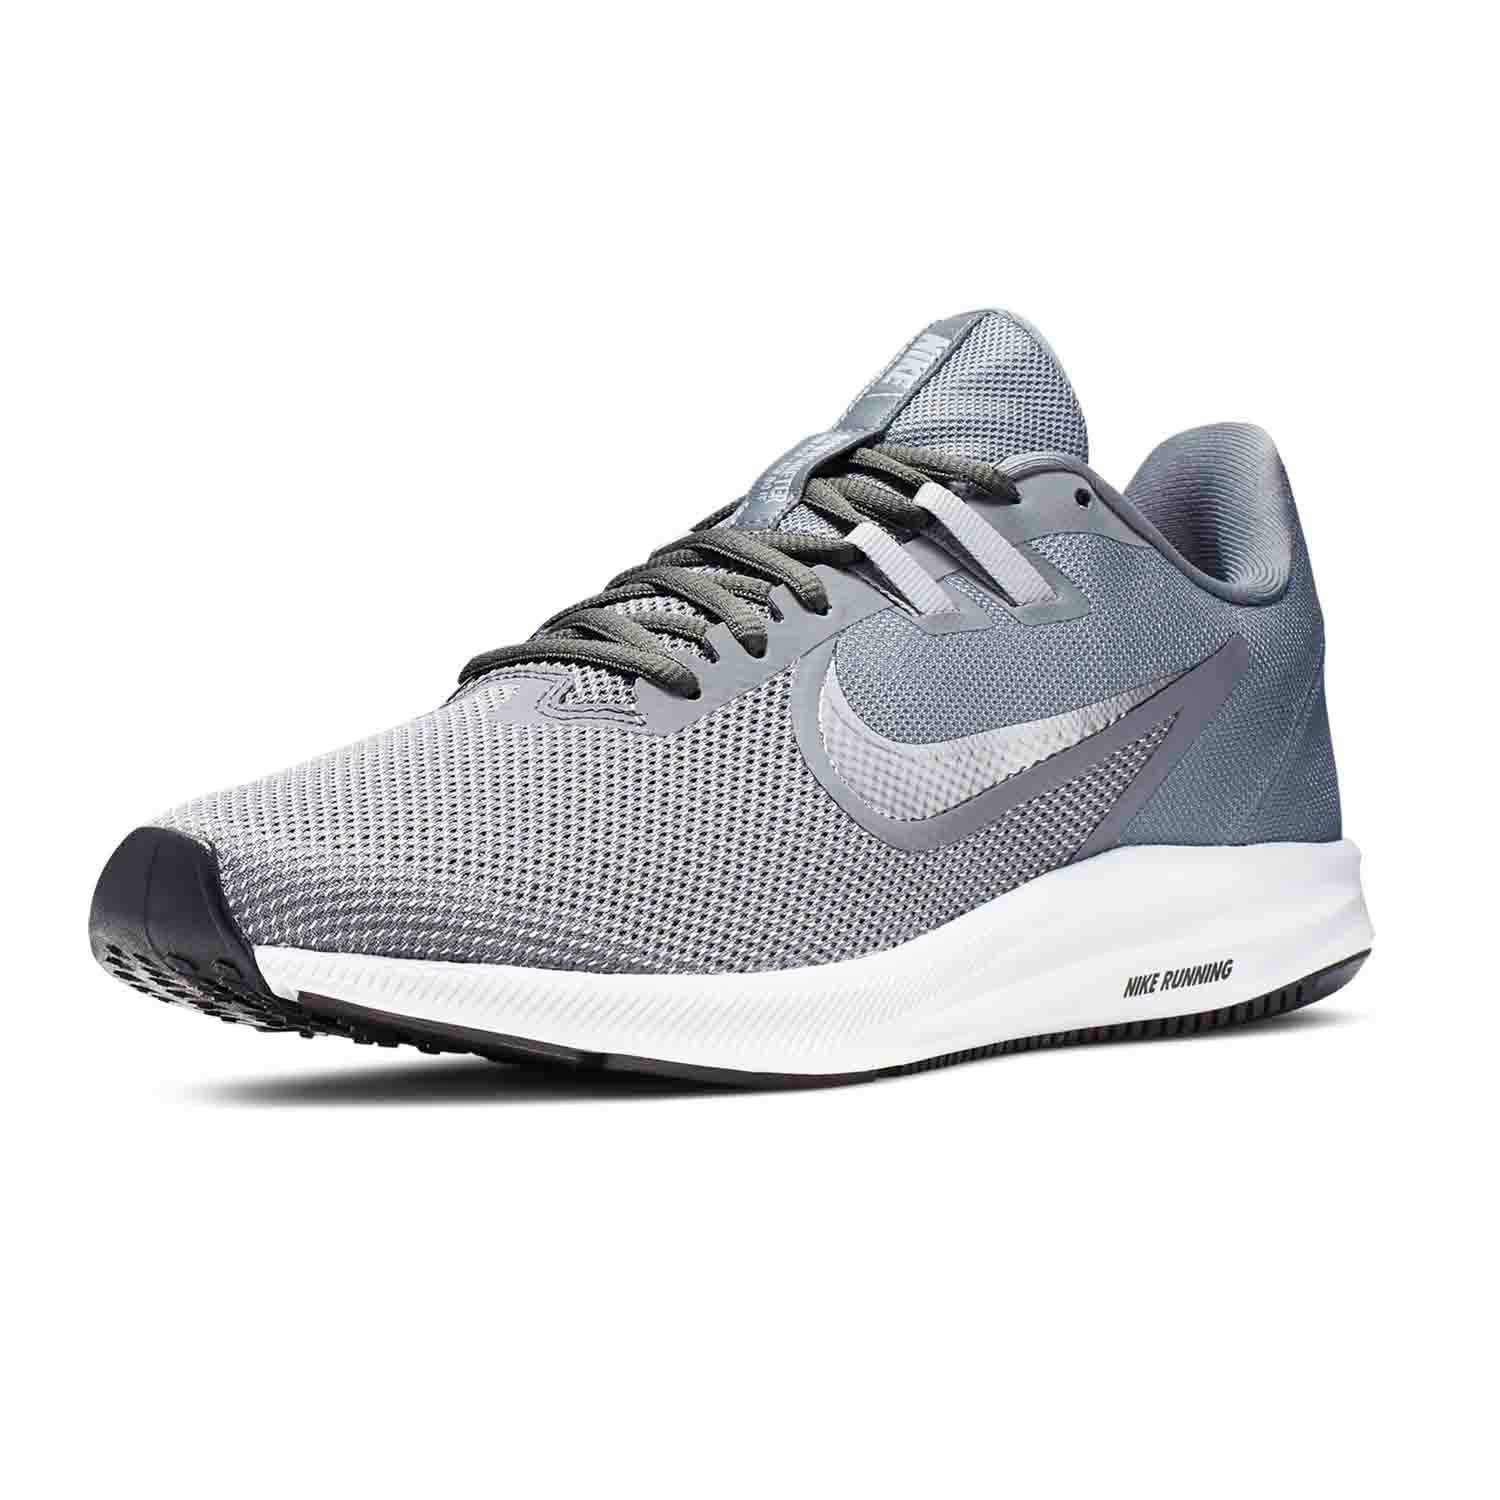 nike downshifter 9 good for running